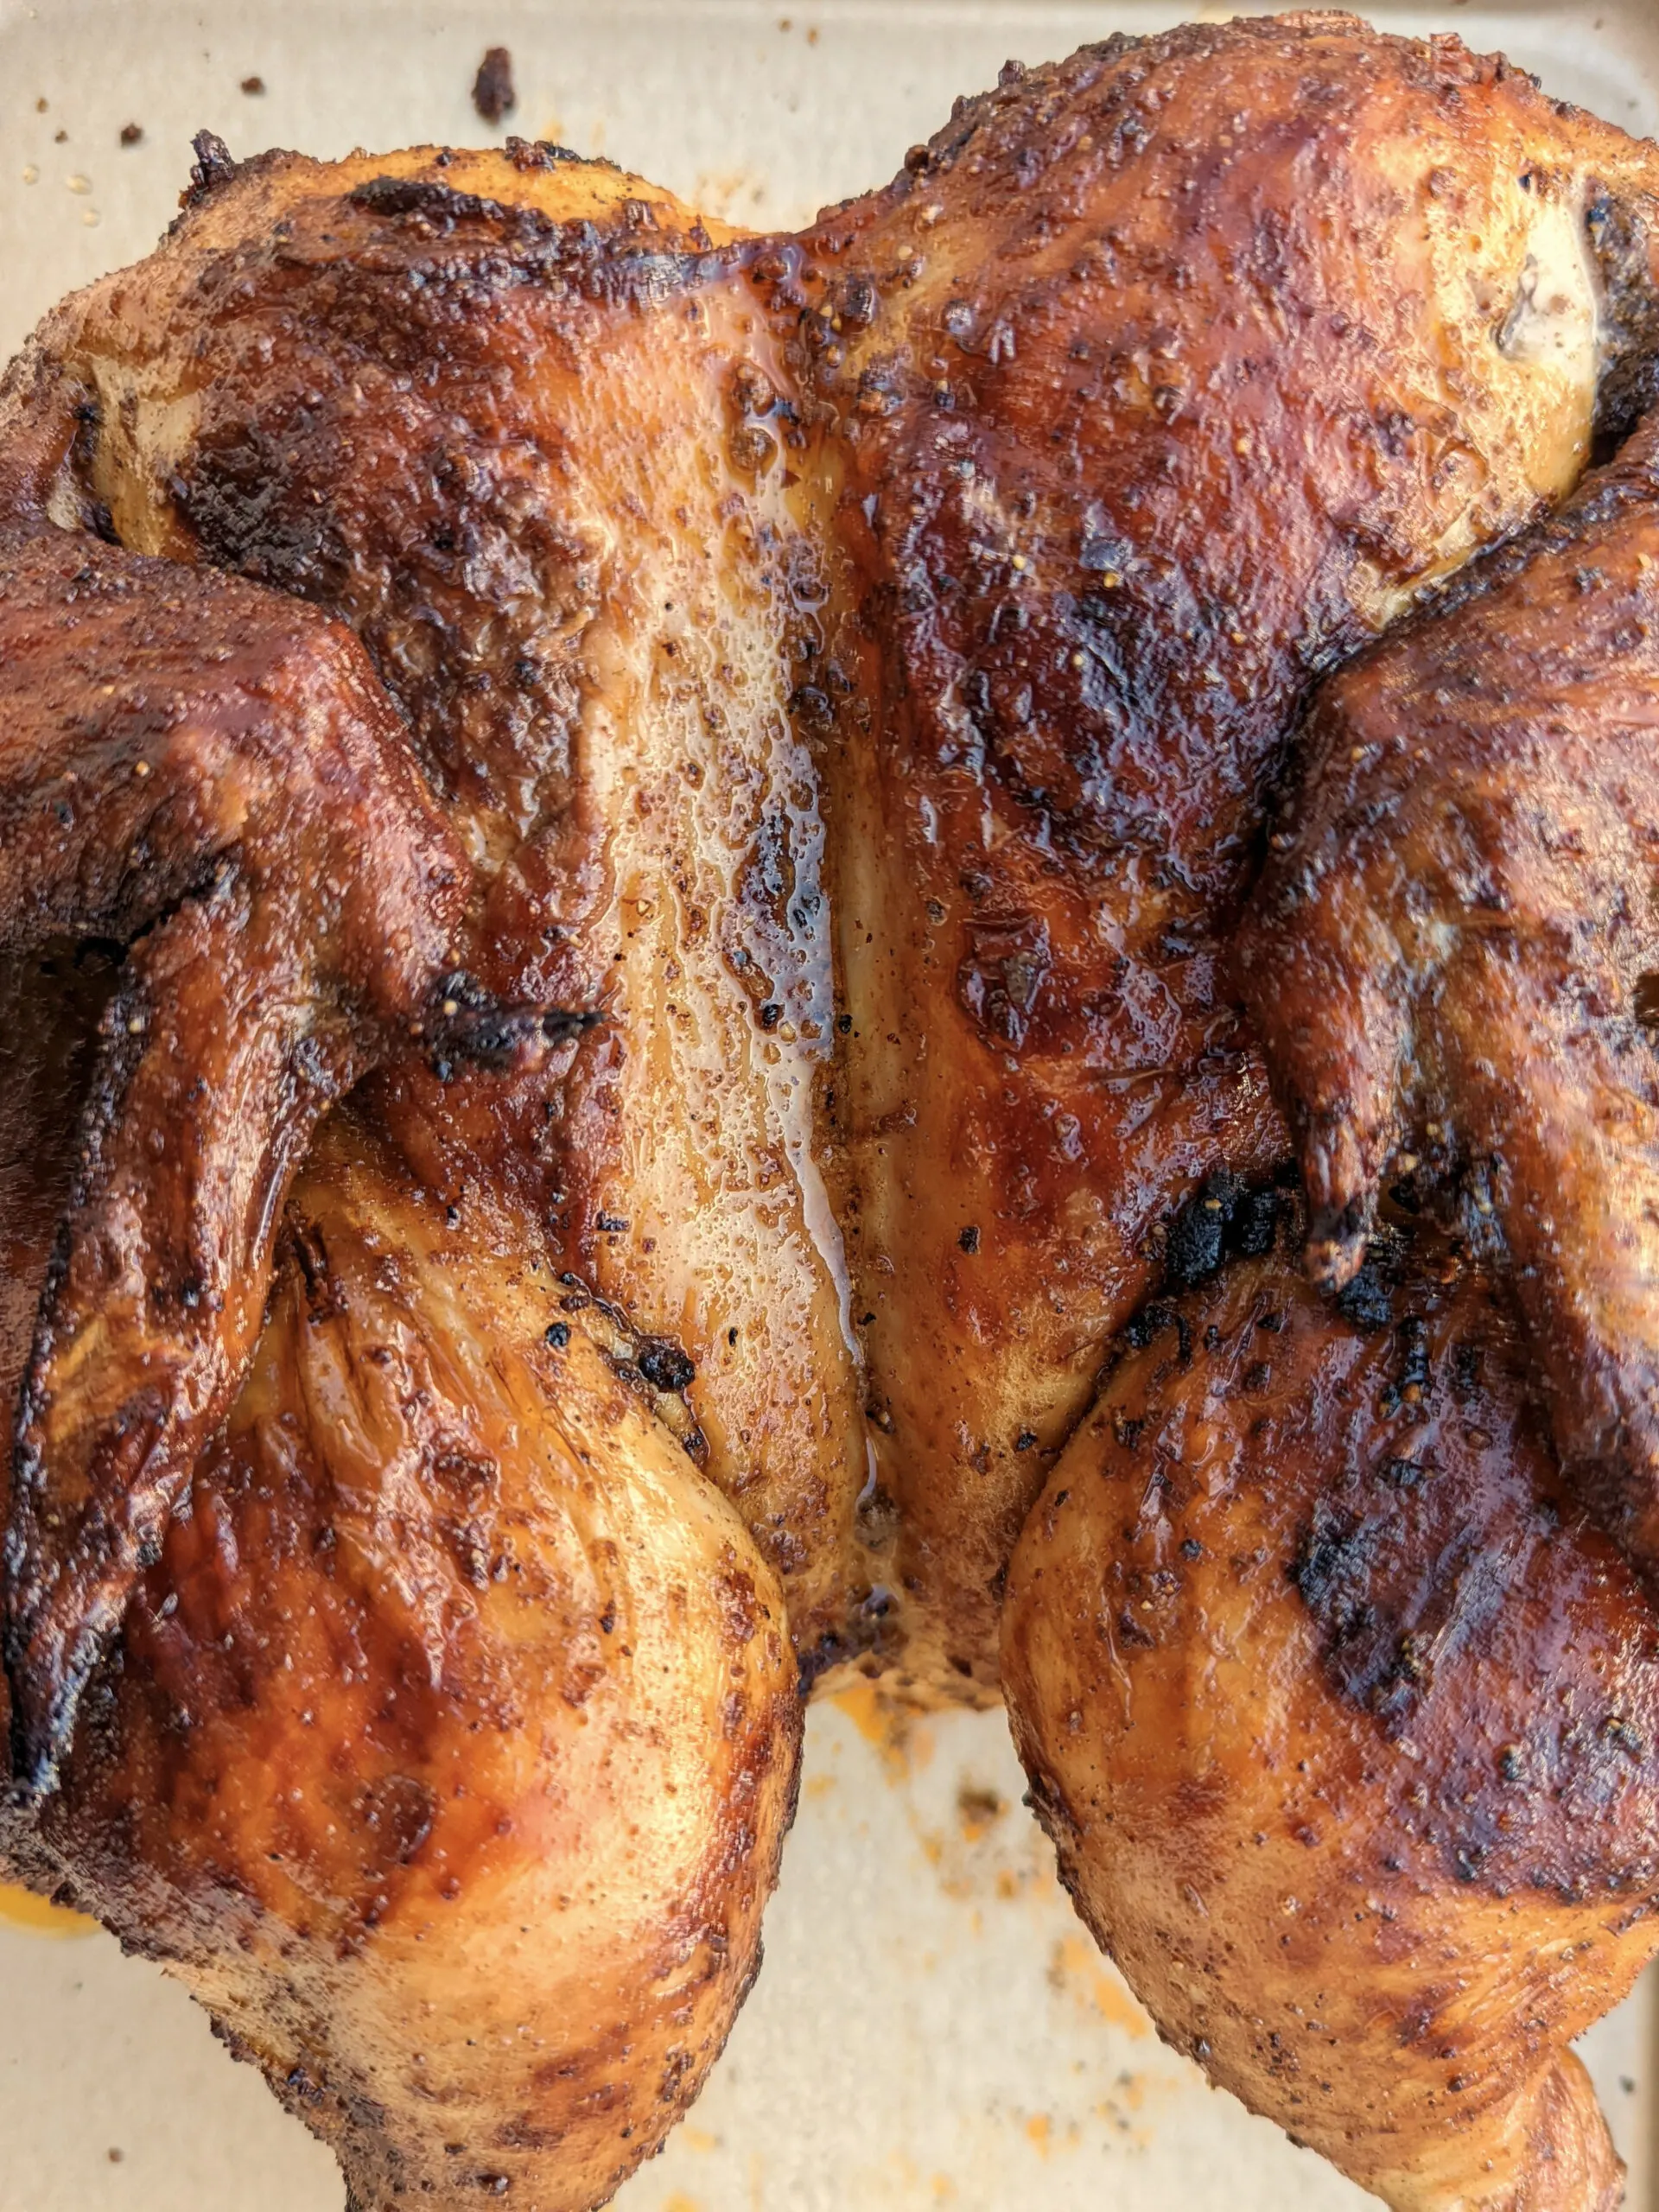 A whole roasted Peruvian chicken on a rimmed baking sheet.